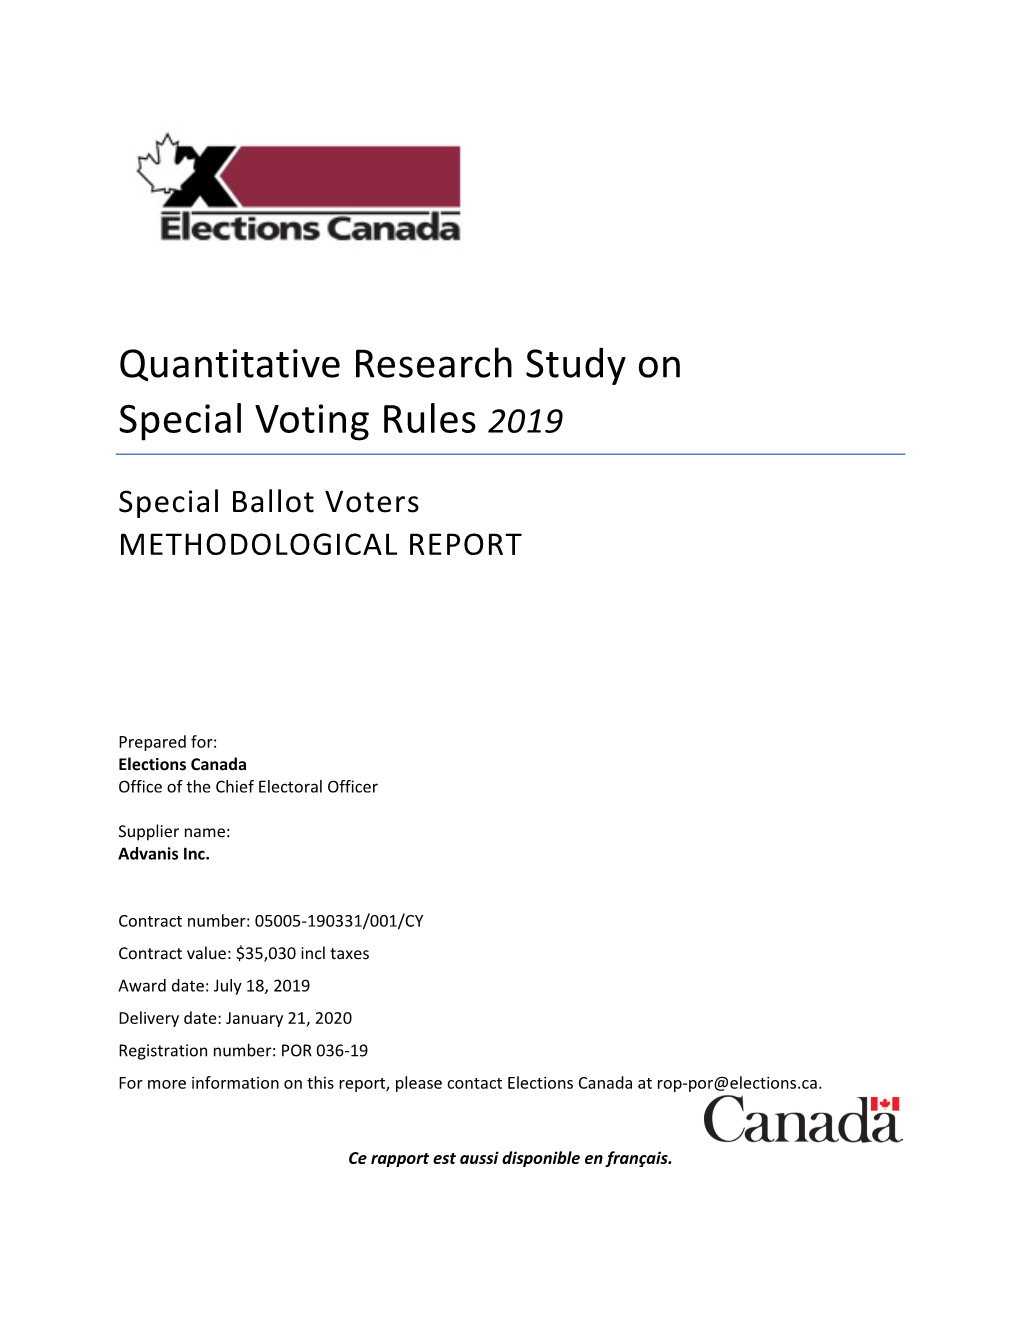 Quantitative Research Study on Special Voting Rules 2019